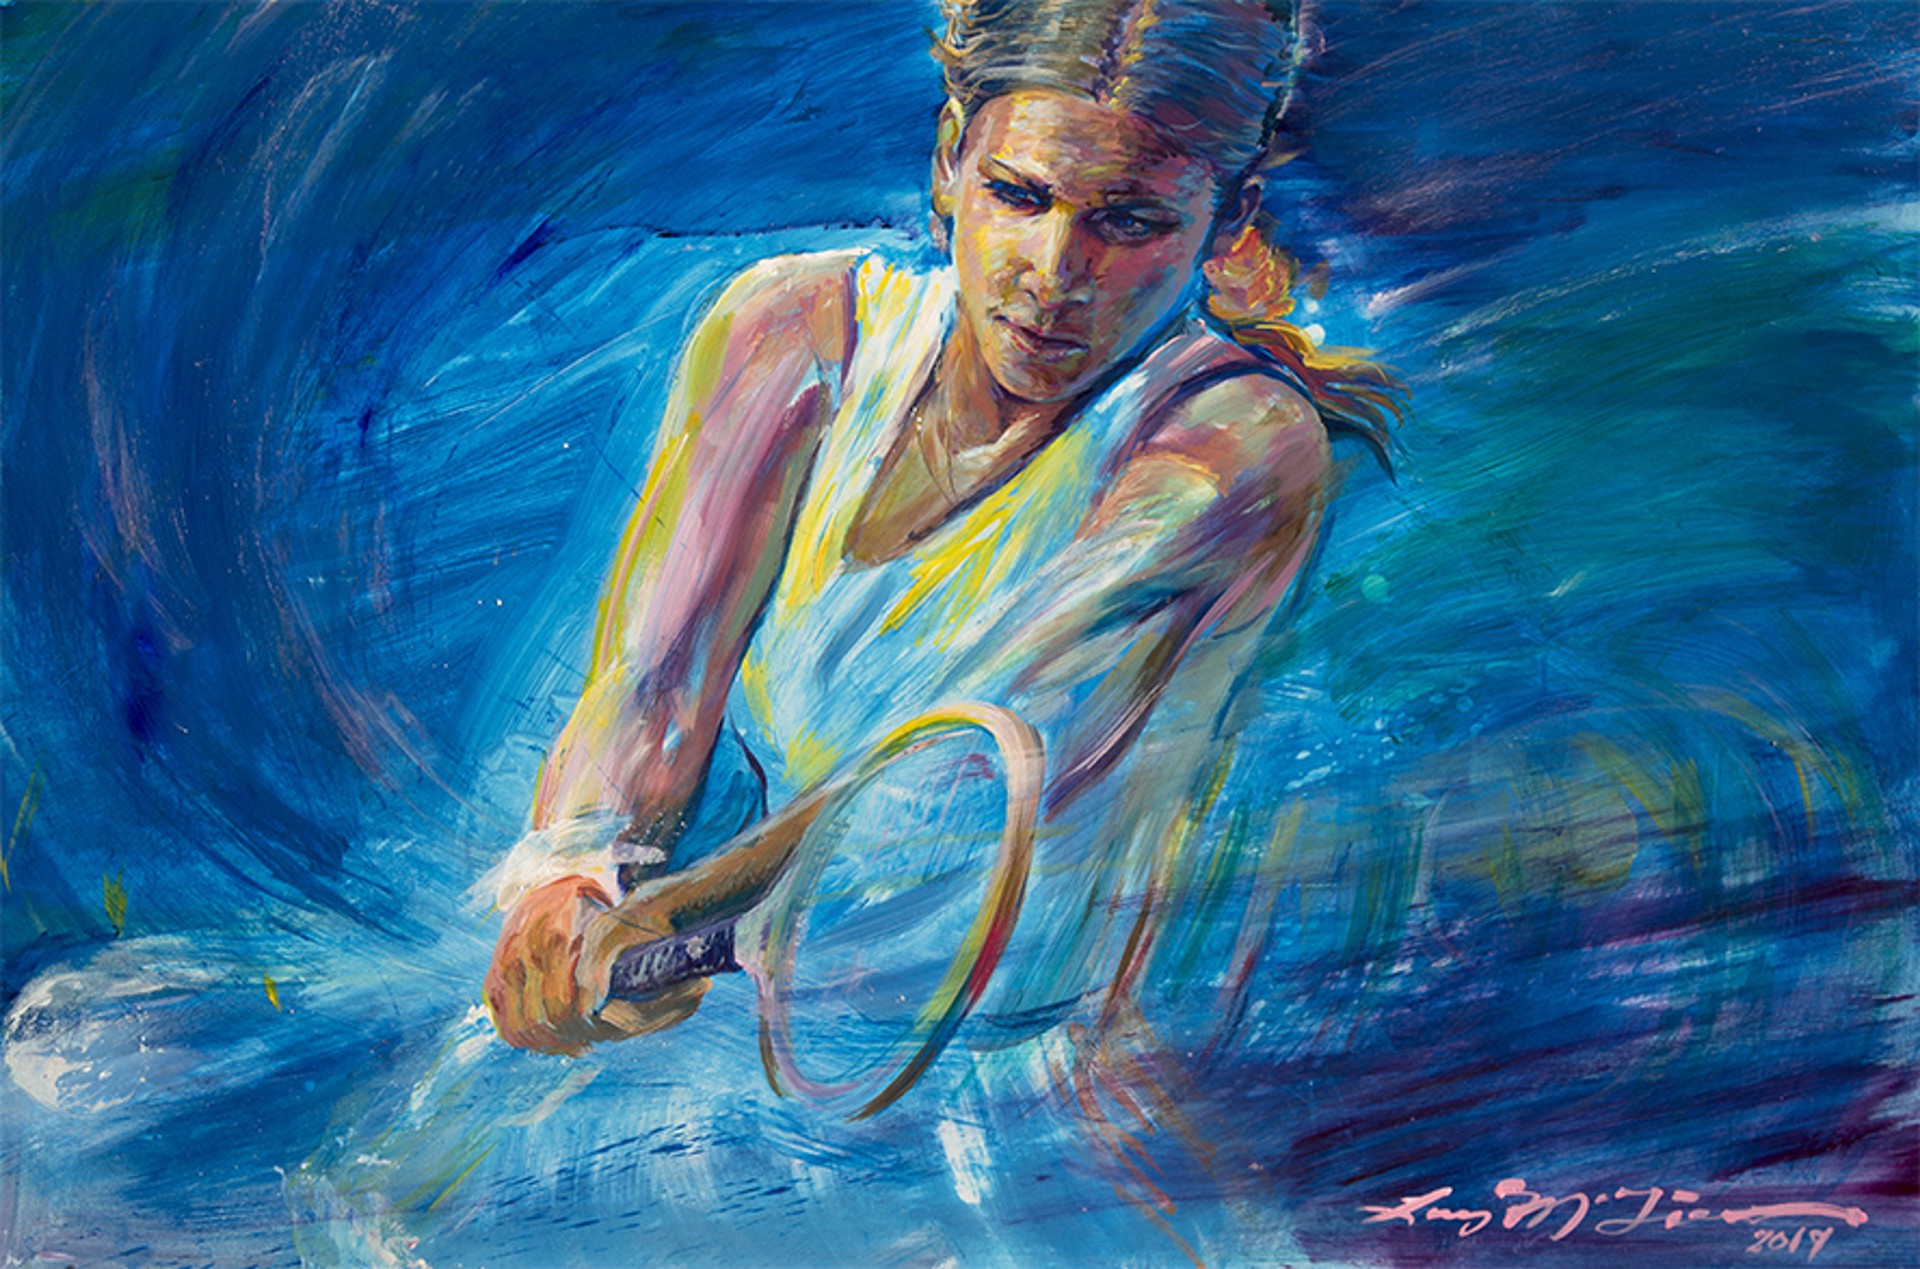 Chris Evert - 2019 by Lucy McTier